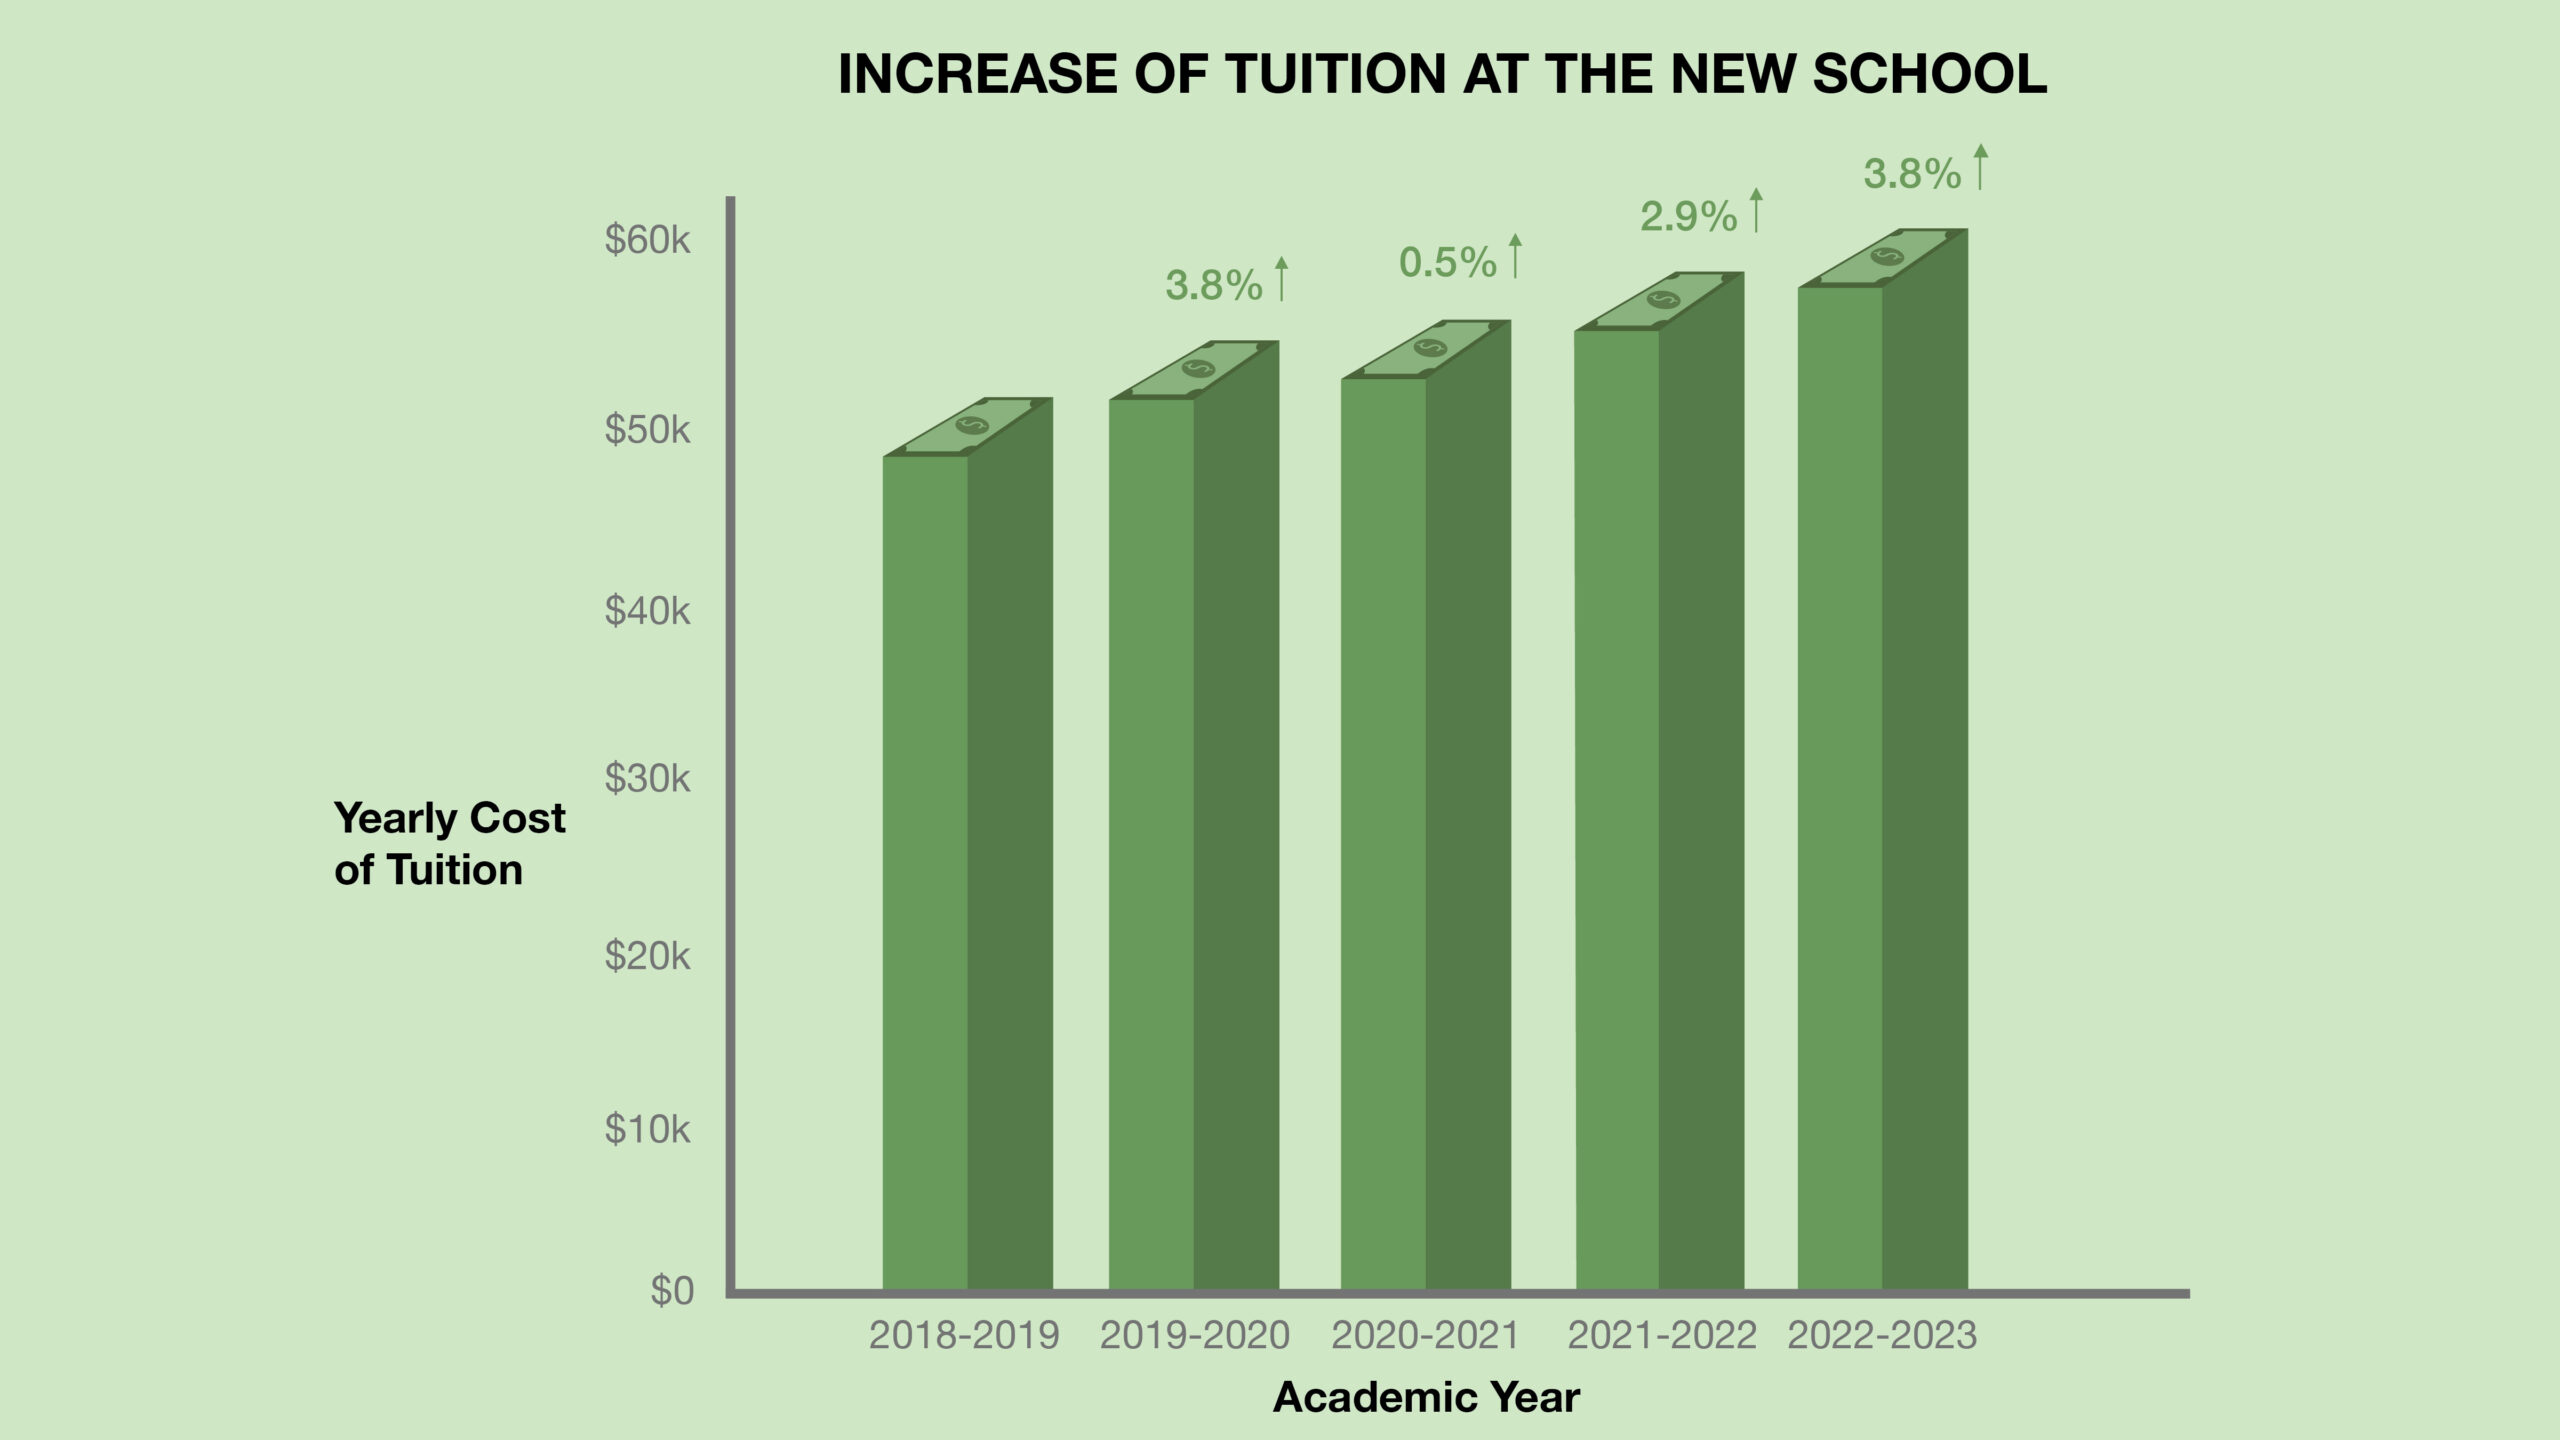 The chart shows the increases in tuition for every school year starting from 2018-2019 and ending with the upcoming 2022-2023 school year. There is a gradual rise from 2018-2019 to 2022-2023, with the percentages being smaller during the years of the pandemic.